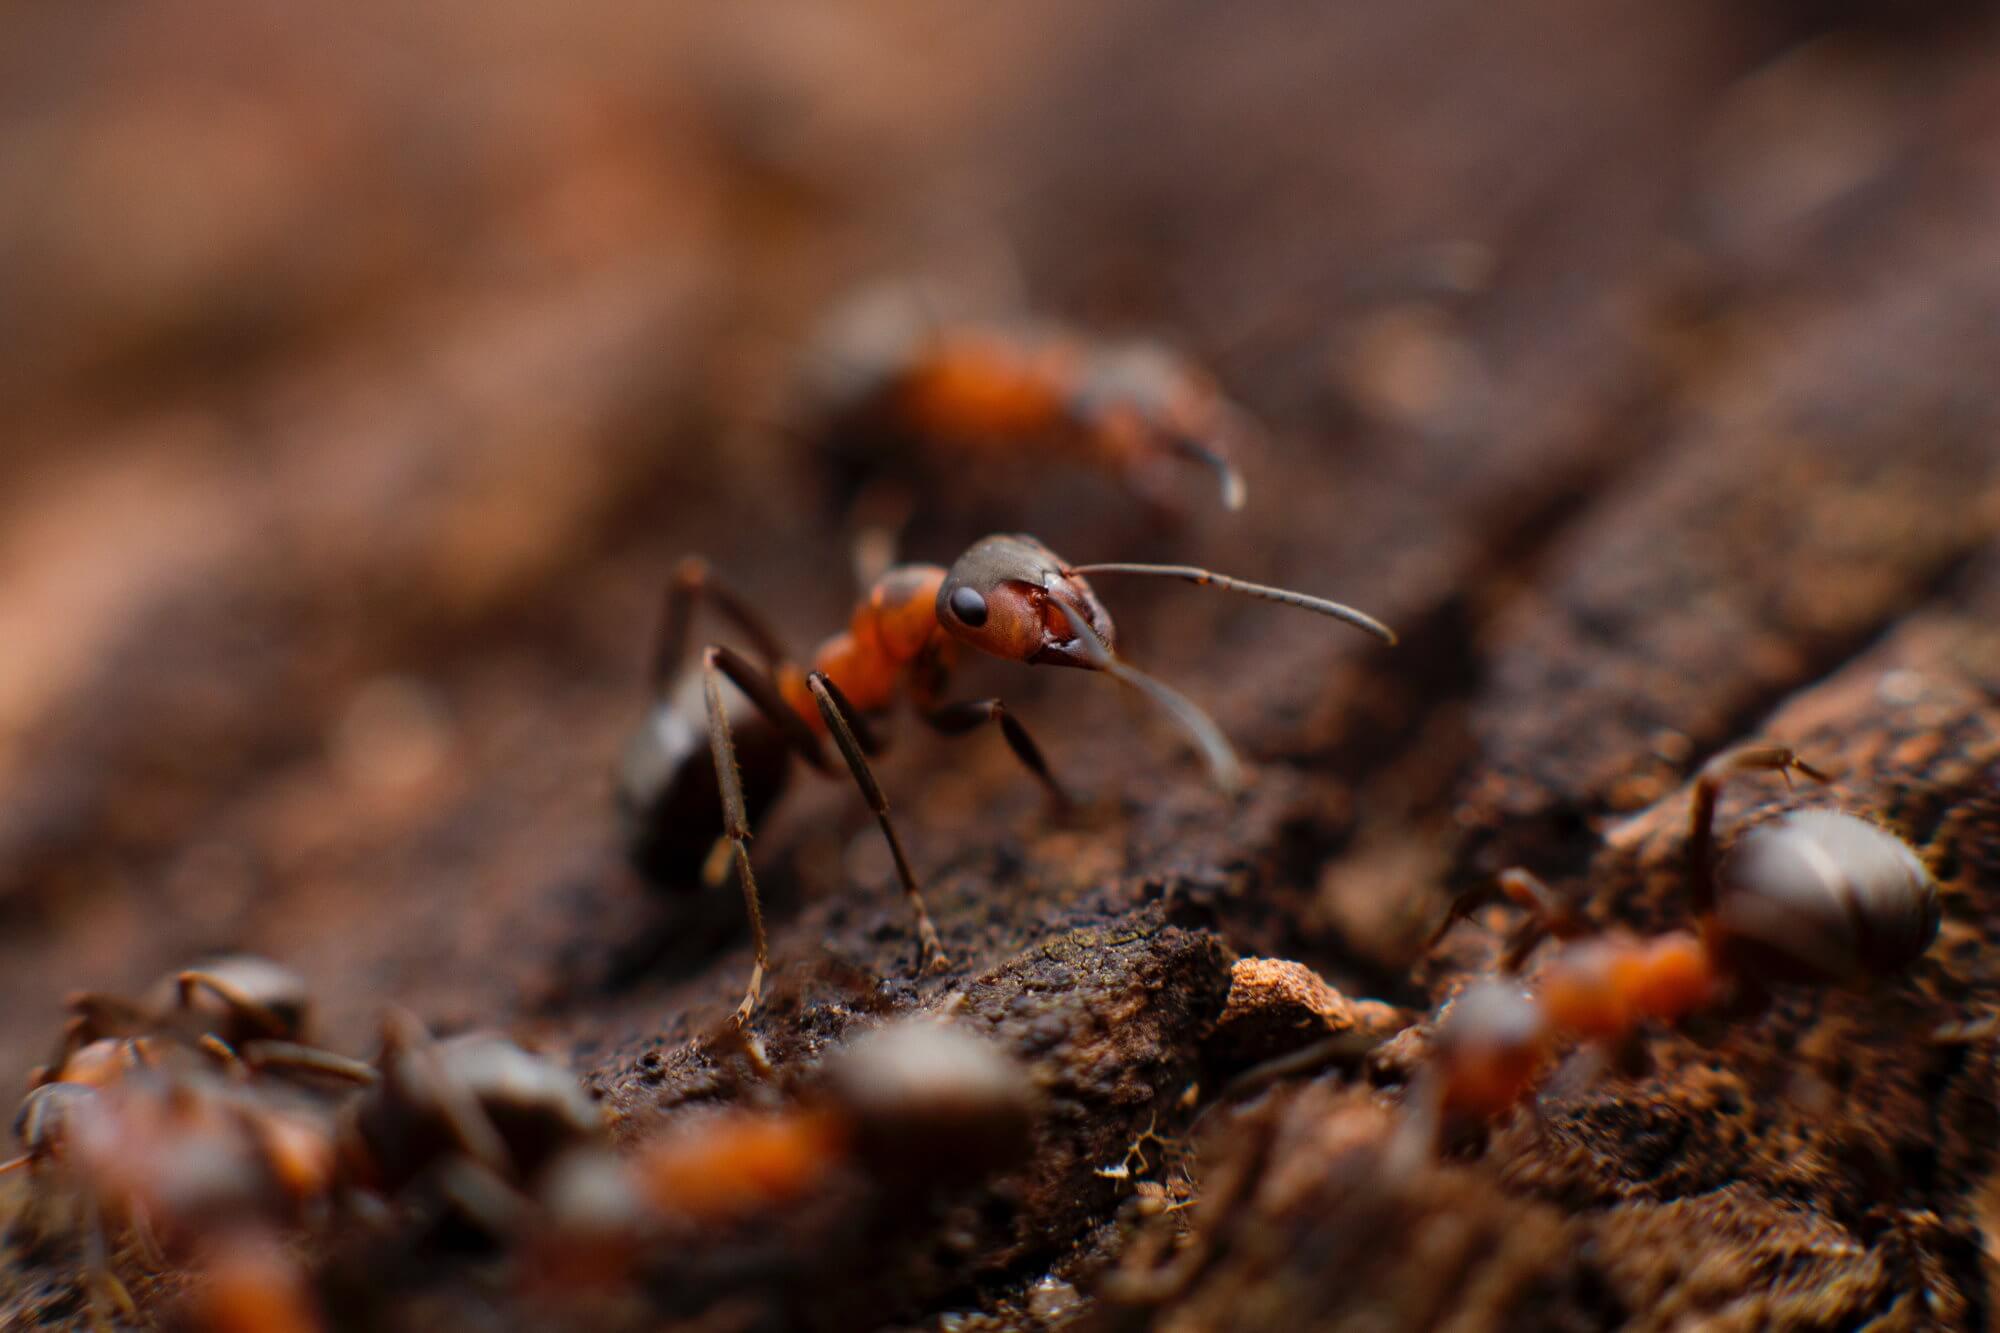 The ants survived for years in an abandoned bunker with no light and food